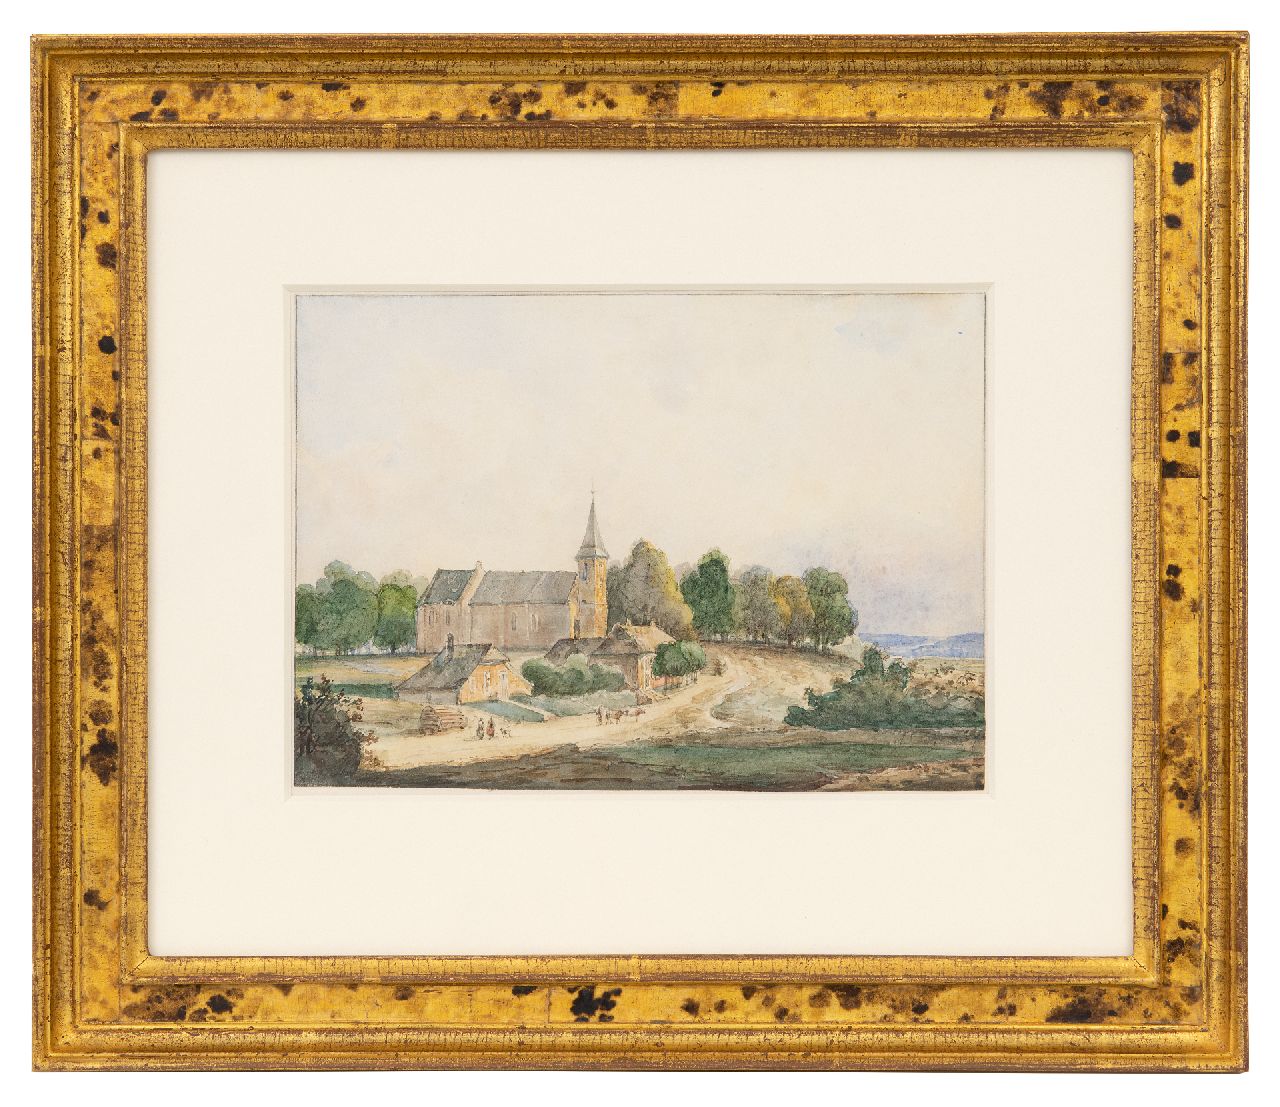 Kleijn L.J.  | Lodewijk Johannes Kleijn | Watercolours and drawings offered for sale | Church in a hilly landscape, watercolour on paper laid down on board 14.5 x 20.1 cm, signed l.r. A. Schelfhout